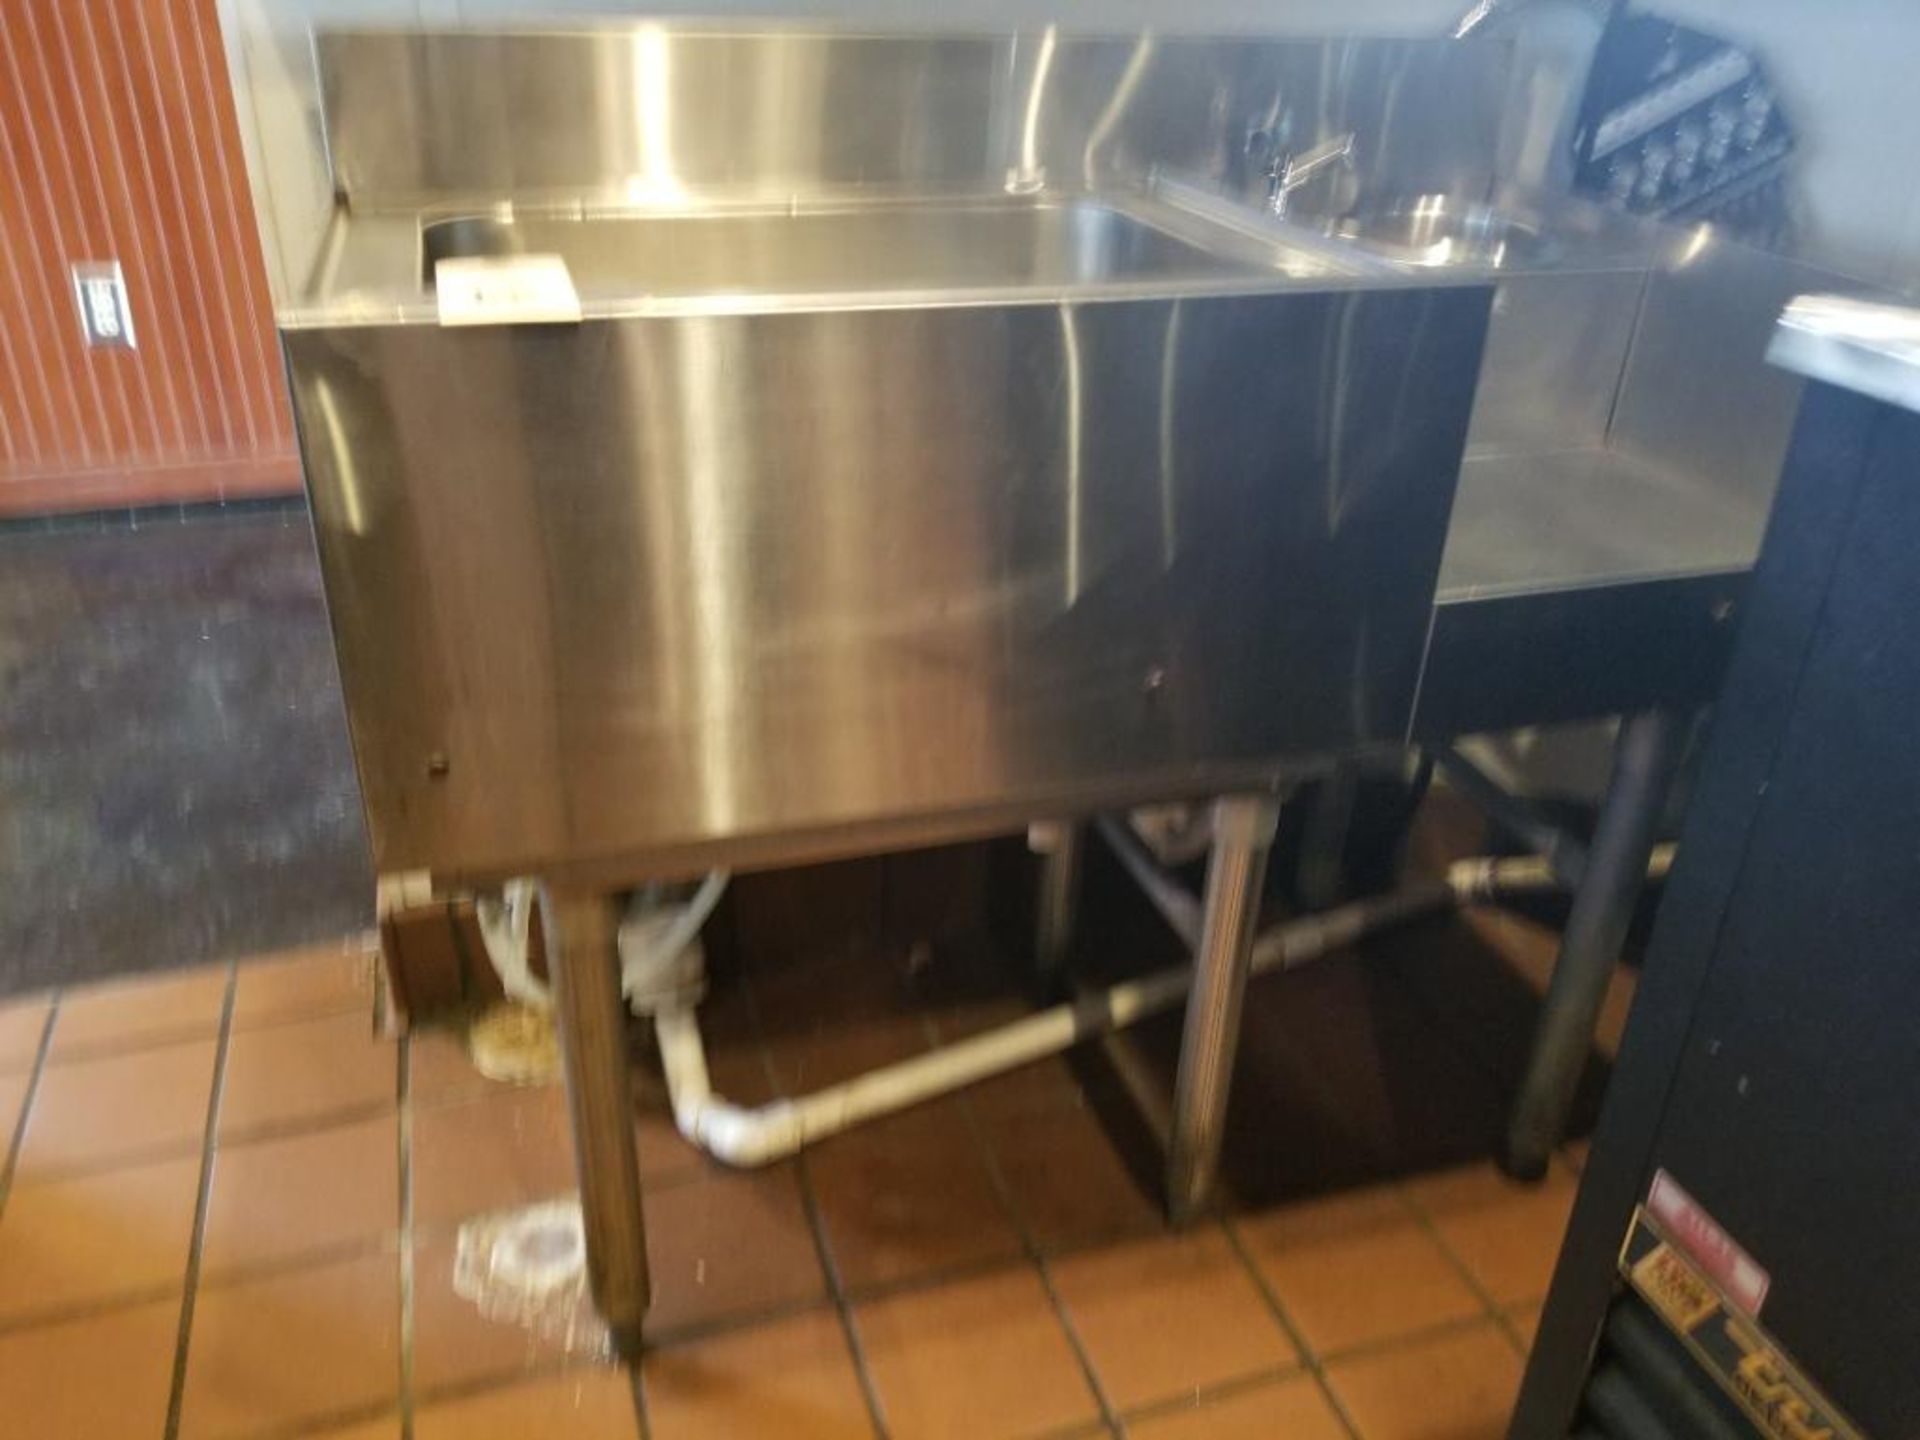 Stainless steel prep table. 36" x 18-1/2" x 31". - Image 6 of 10